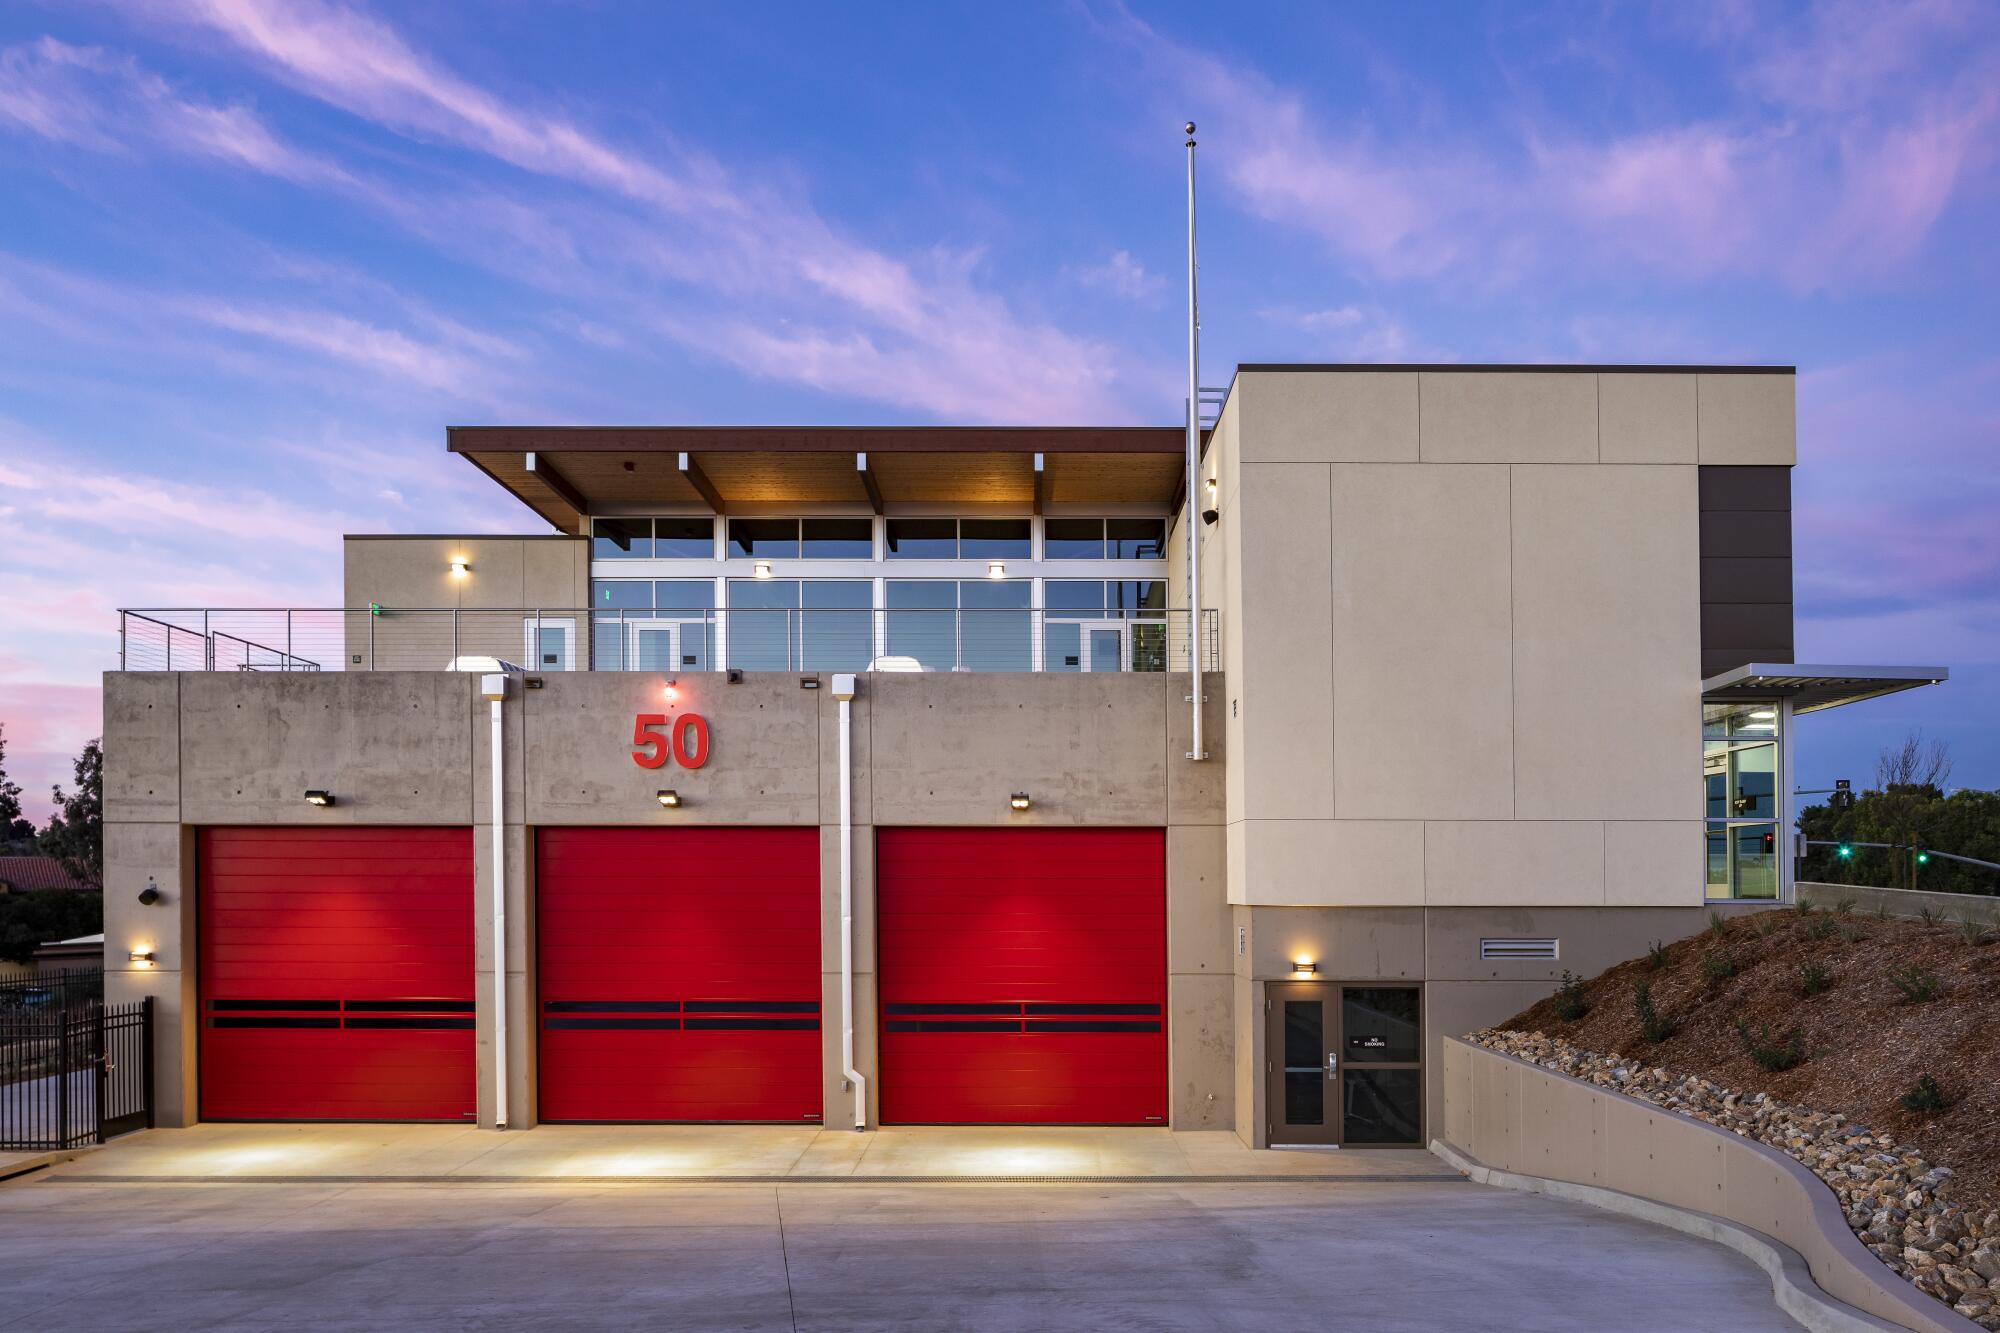 Orchids & Onions 2021: Orchid por arquitectura - San Diego Fire Station 50